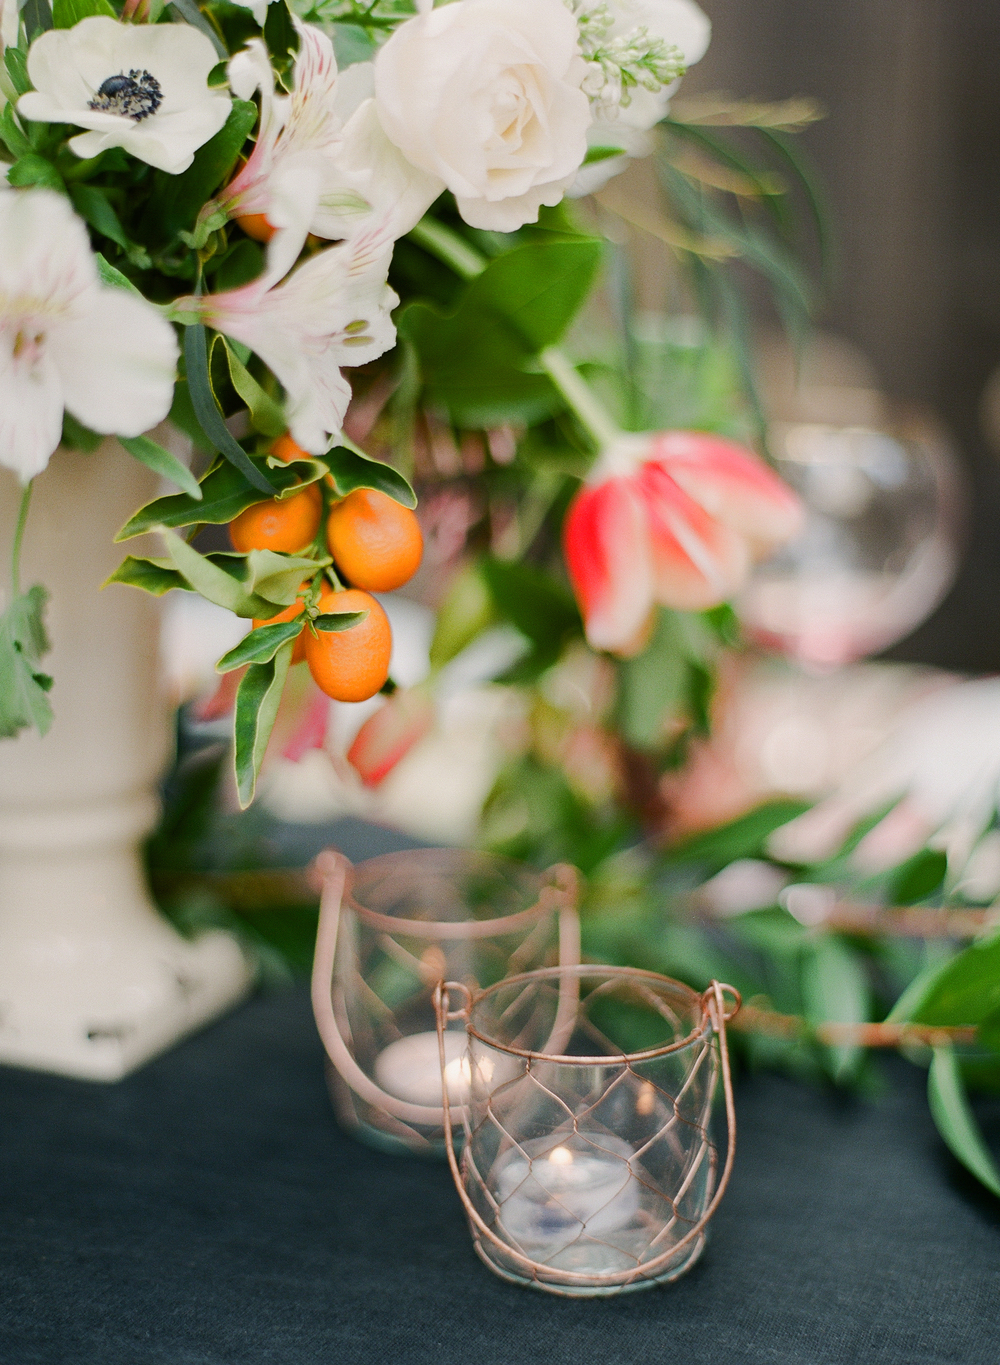 Party planning made easy with effortless outdoor entertaining tips form boxwoodavenue.com | kevin chin photography